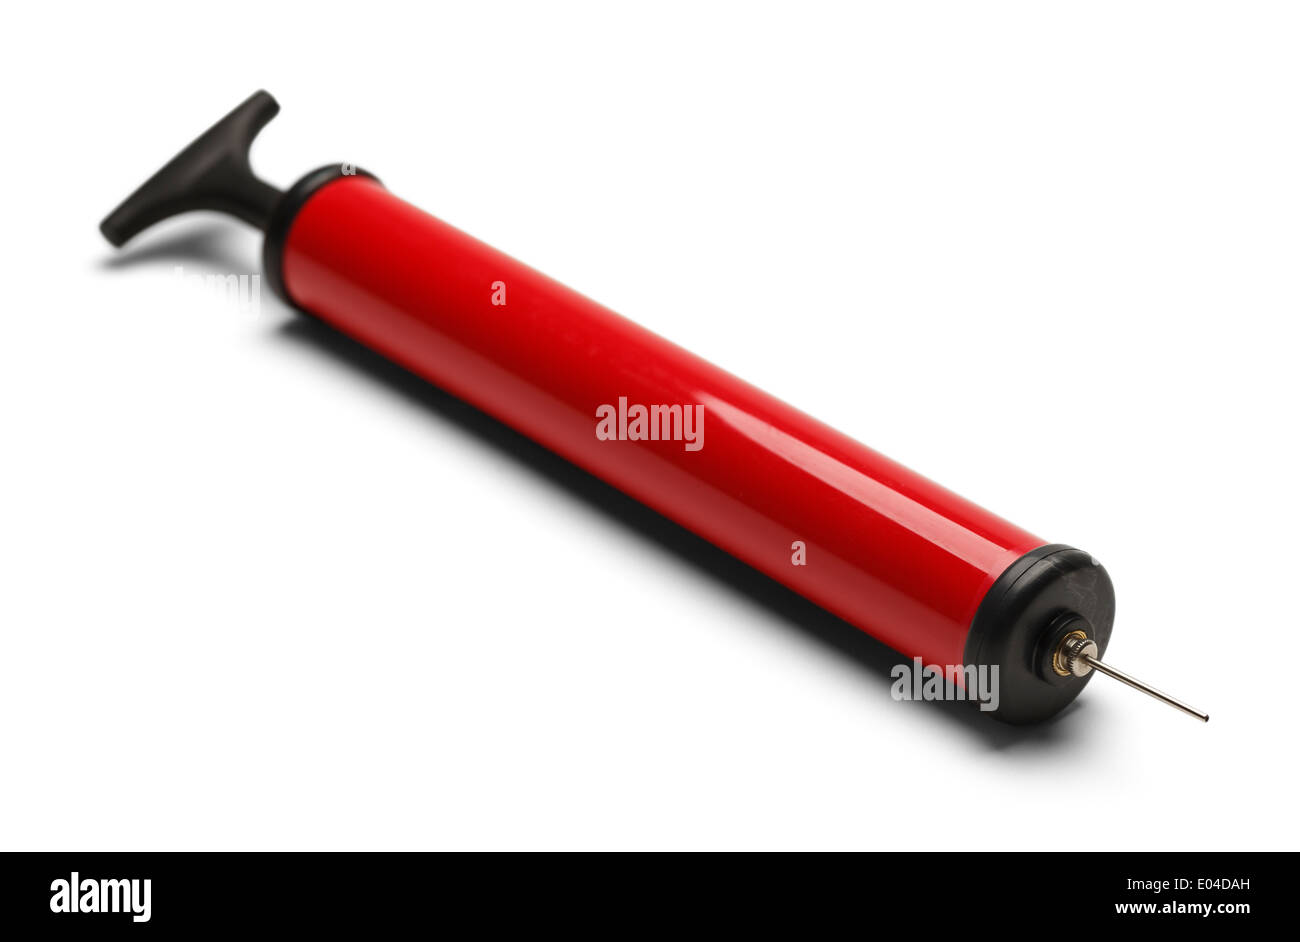 Red Pump with Needle Isolated on White Background. Stock Photo